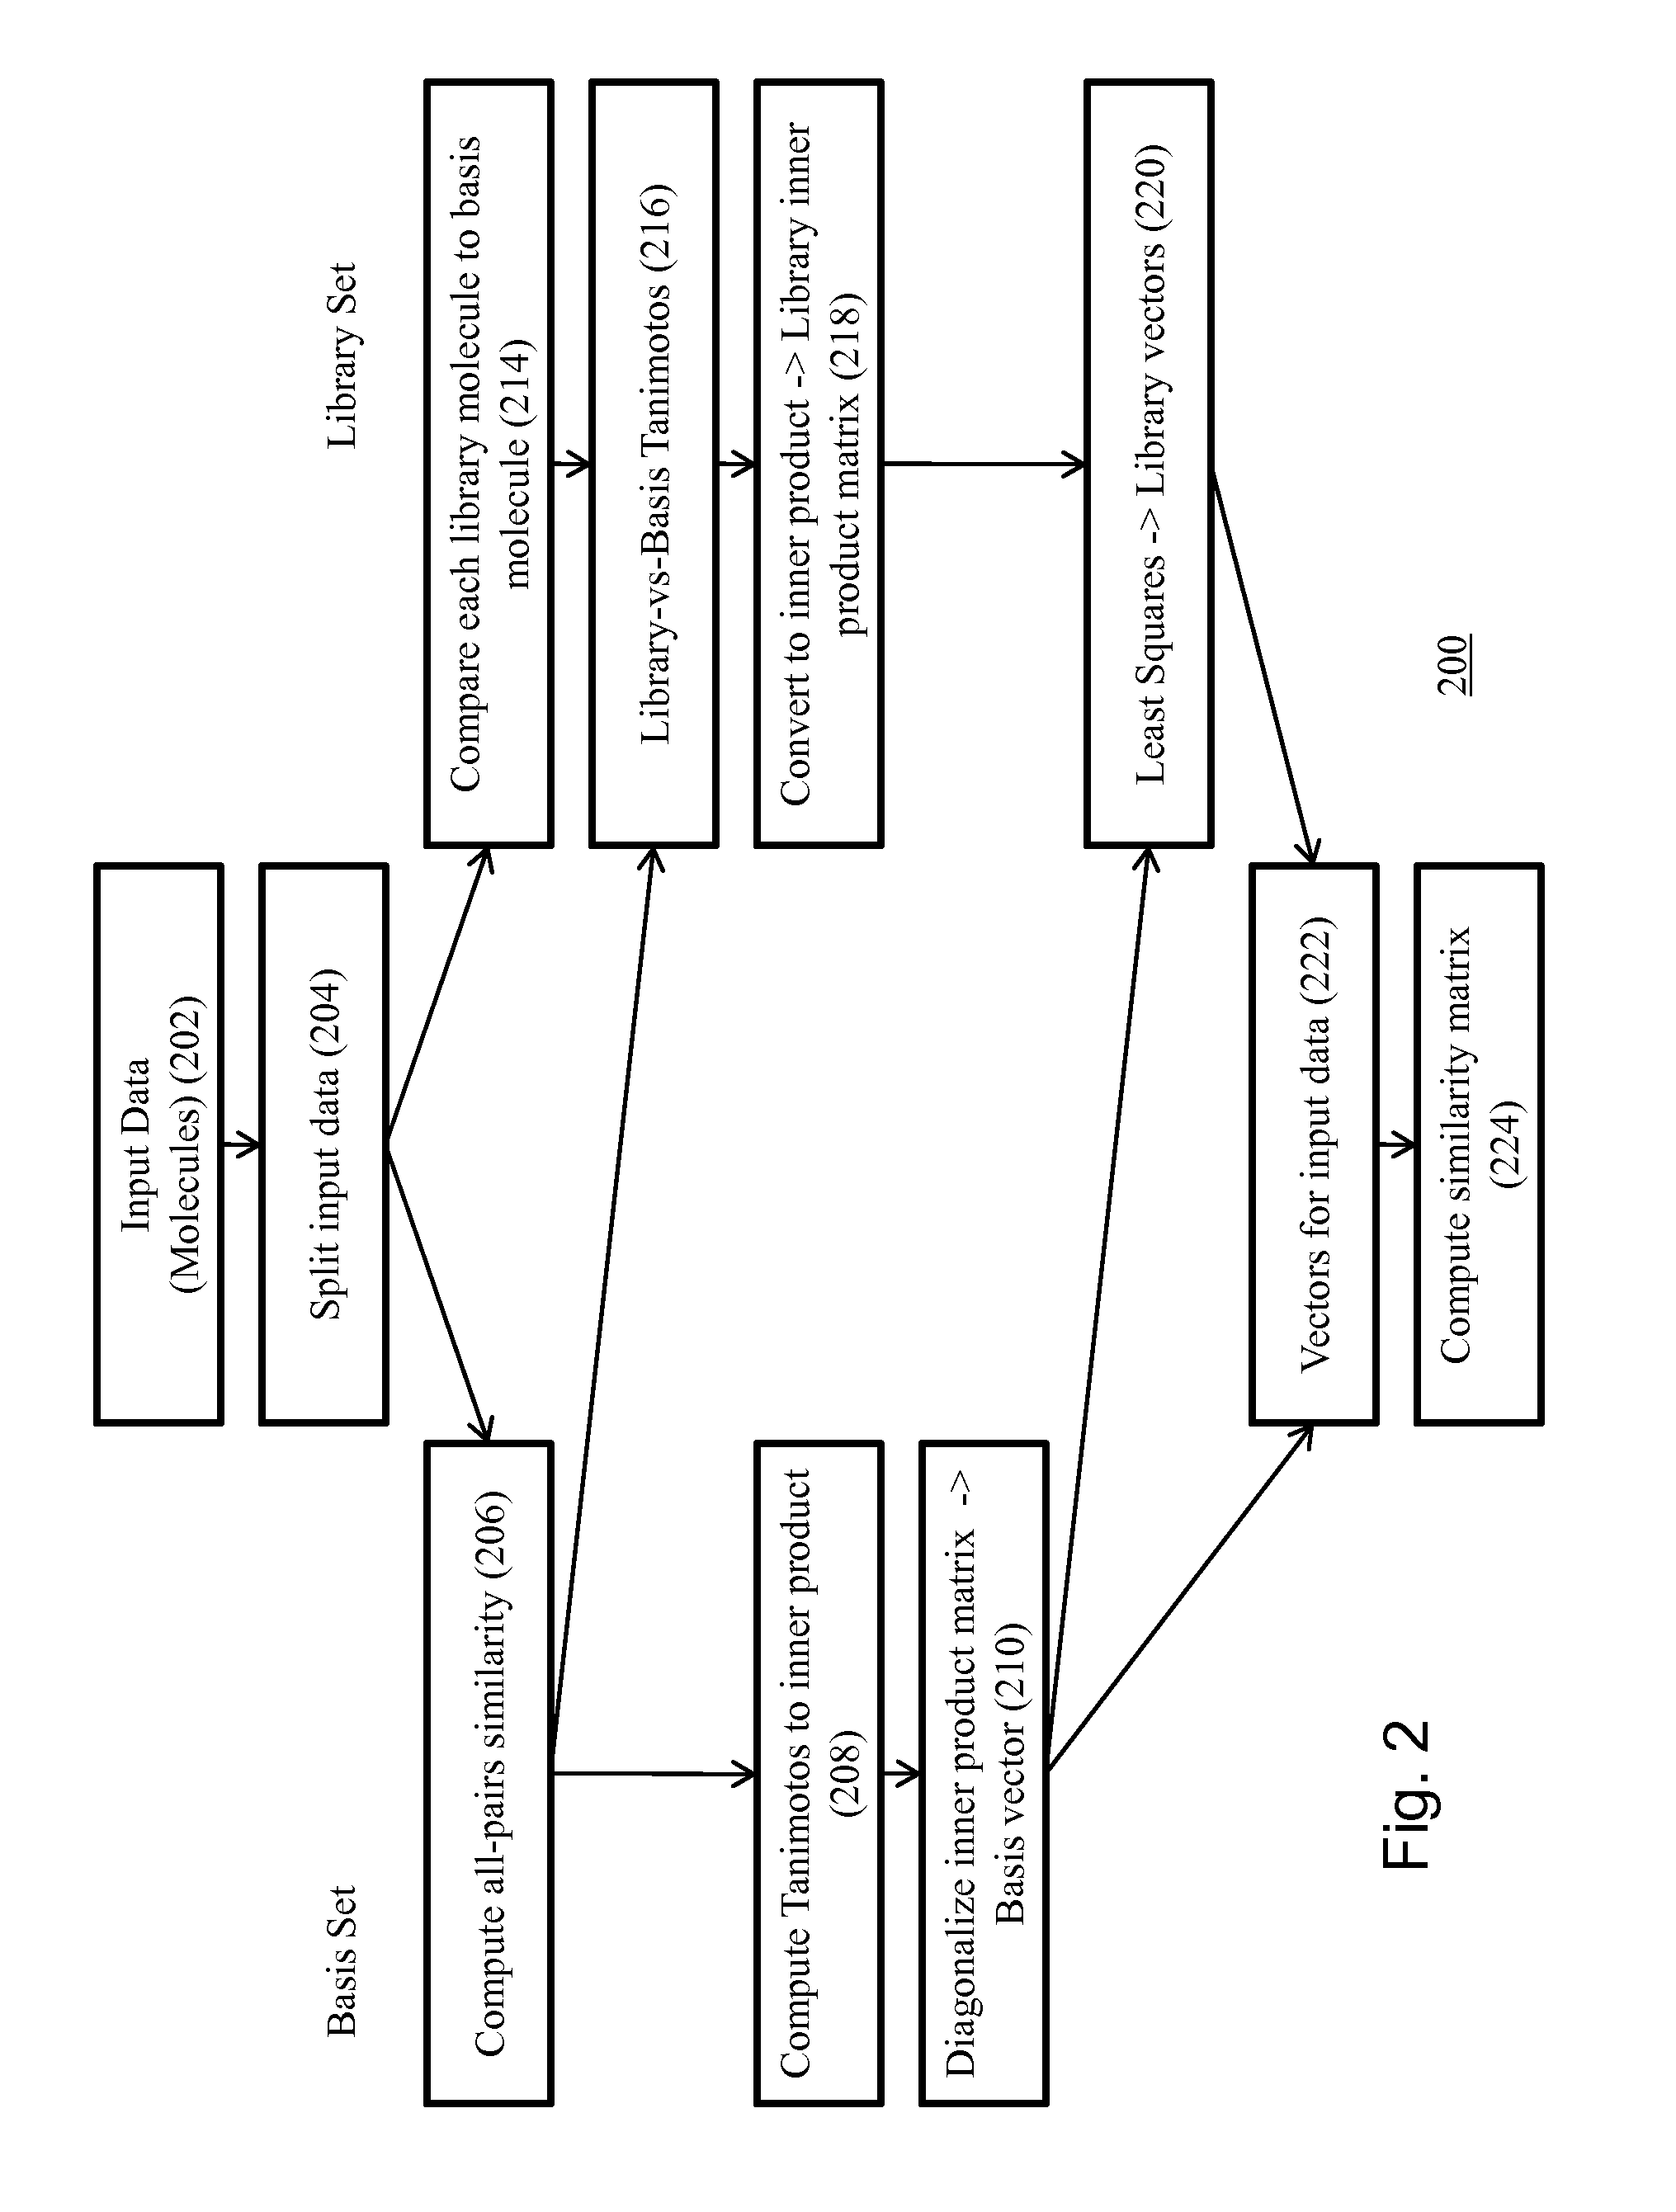 Method for Rapidly Approximating Similarities